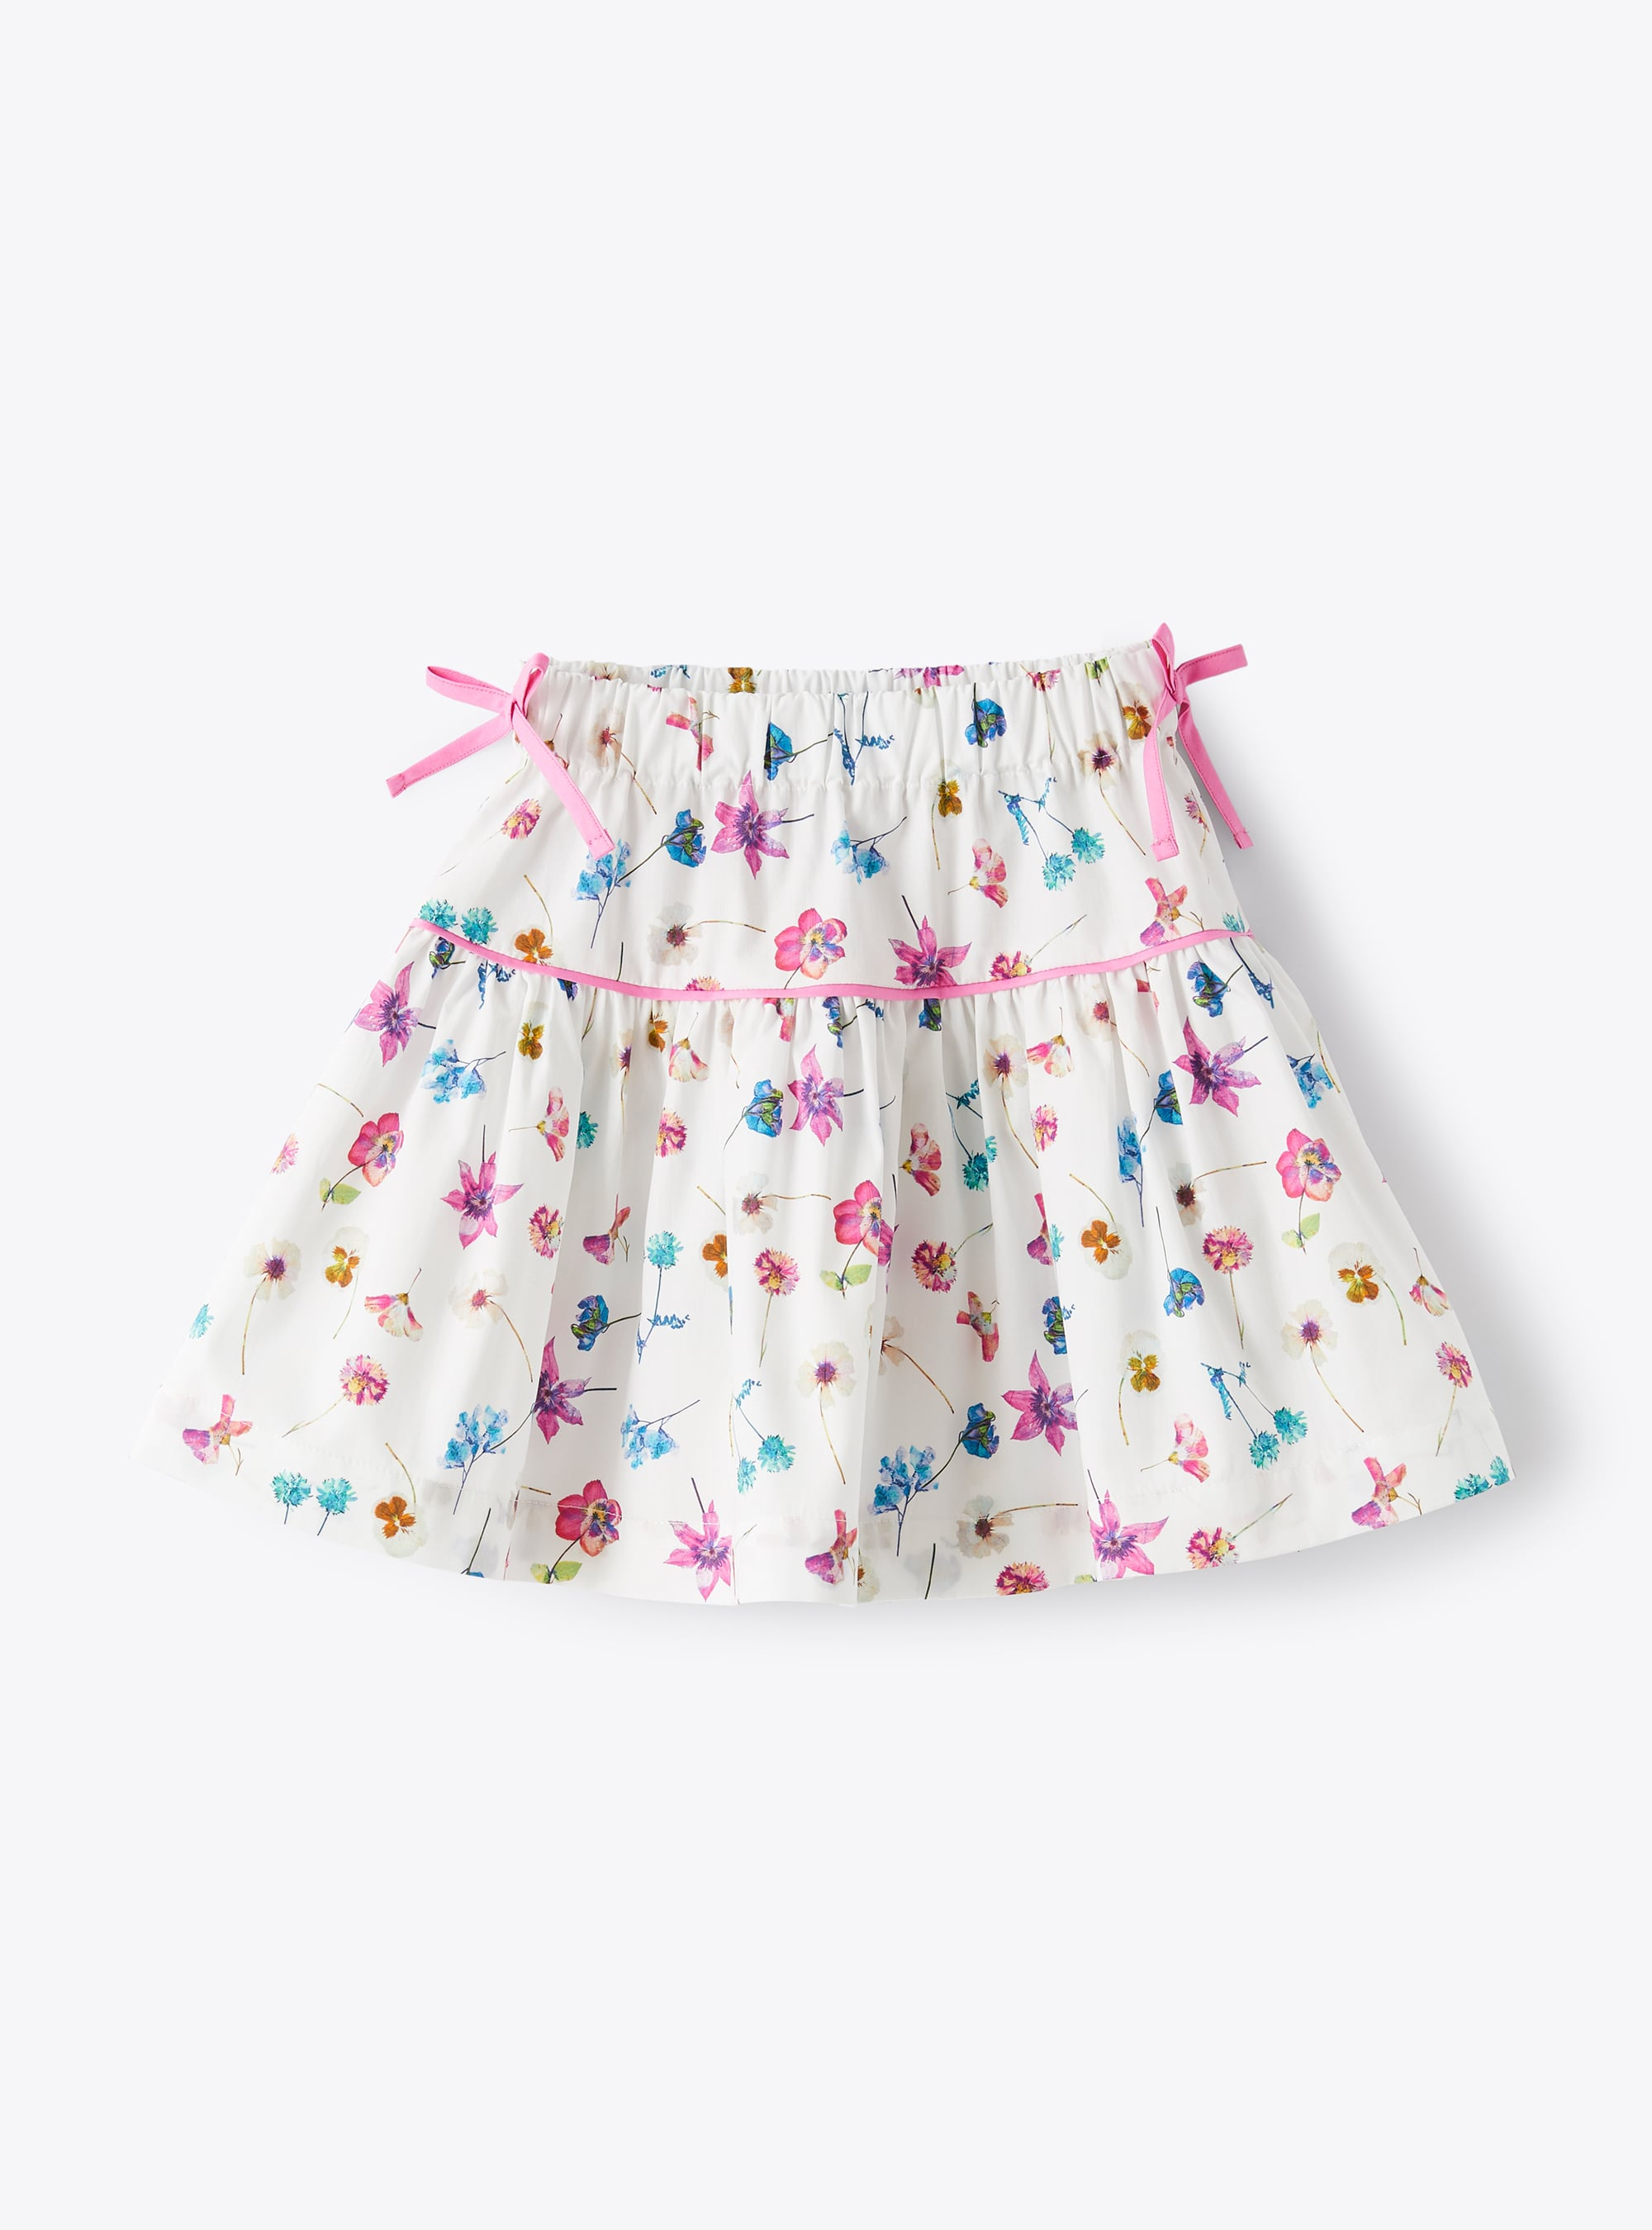 Cotton skirt in an exclusive floral print design - Skirts - Il Gufo